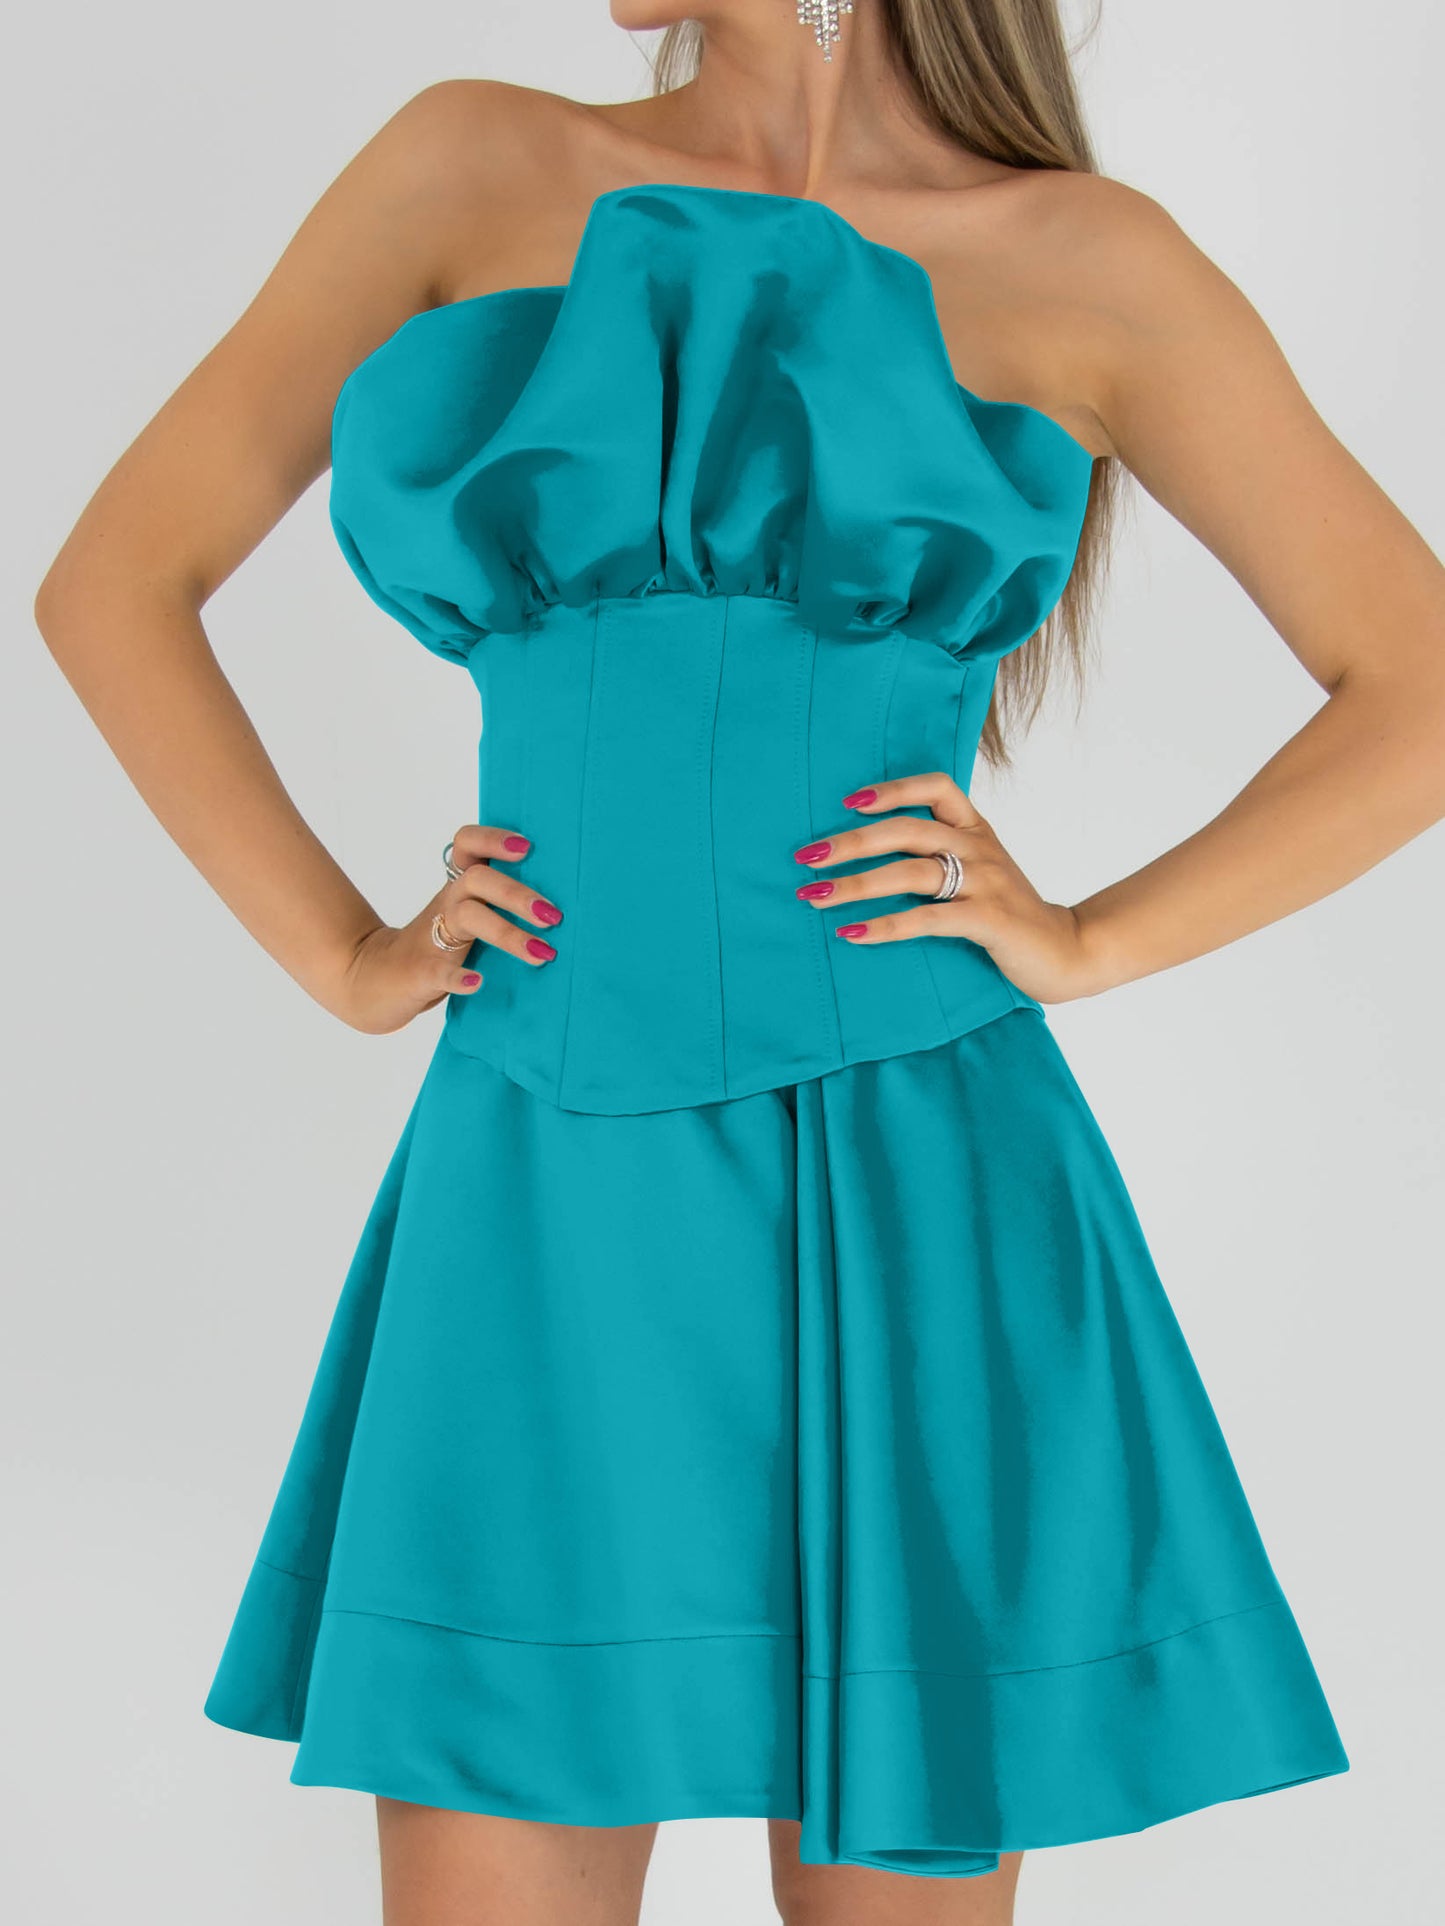 Ray of Sunshine Corset Bustier Top - Teal Blue